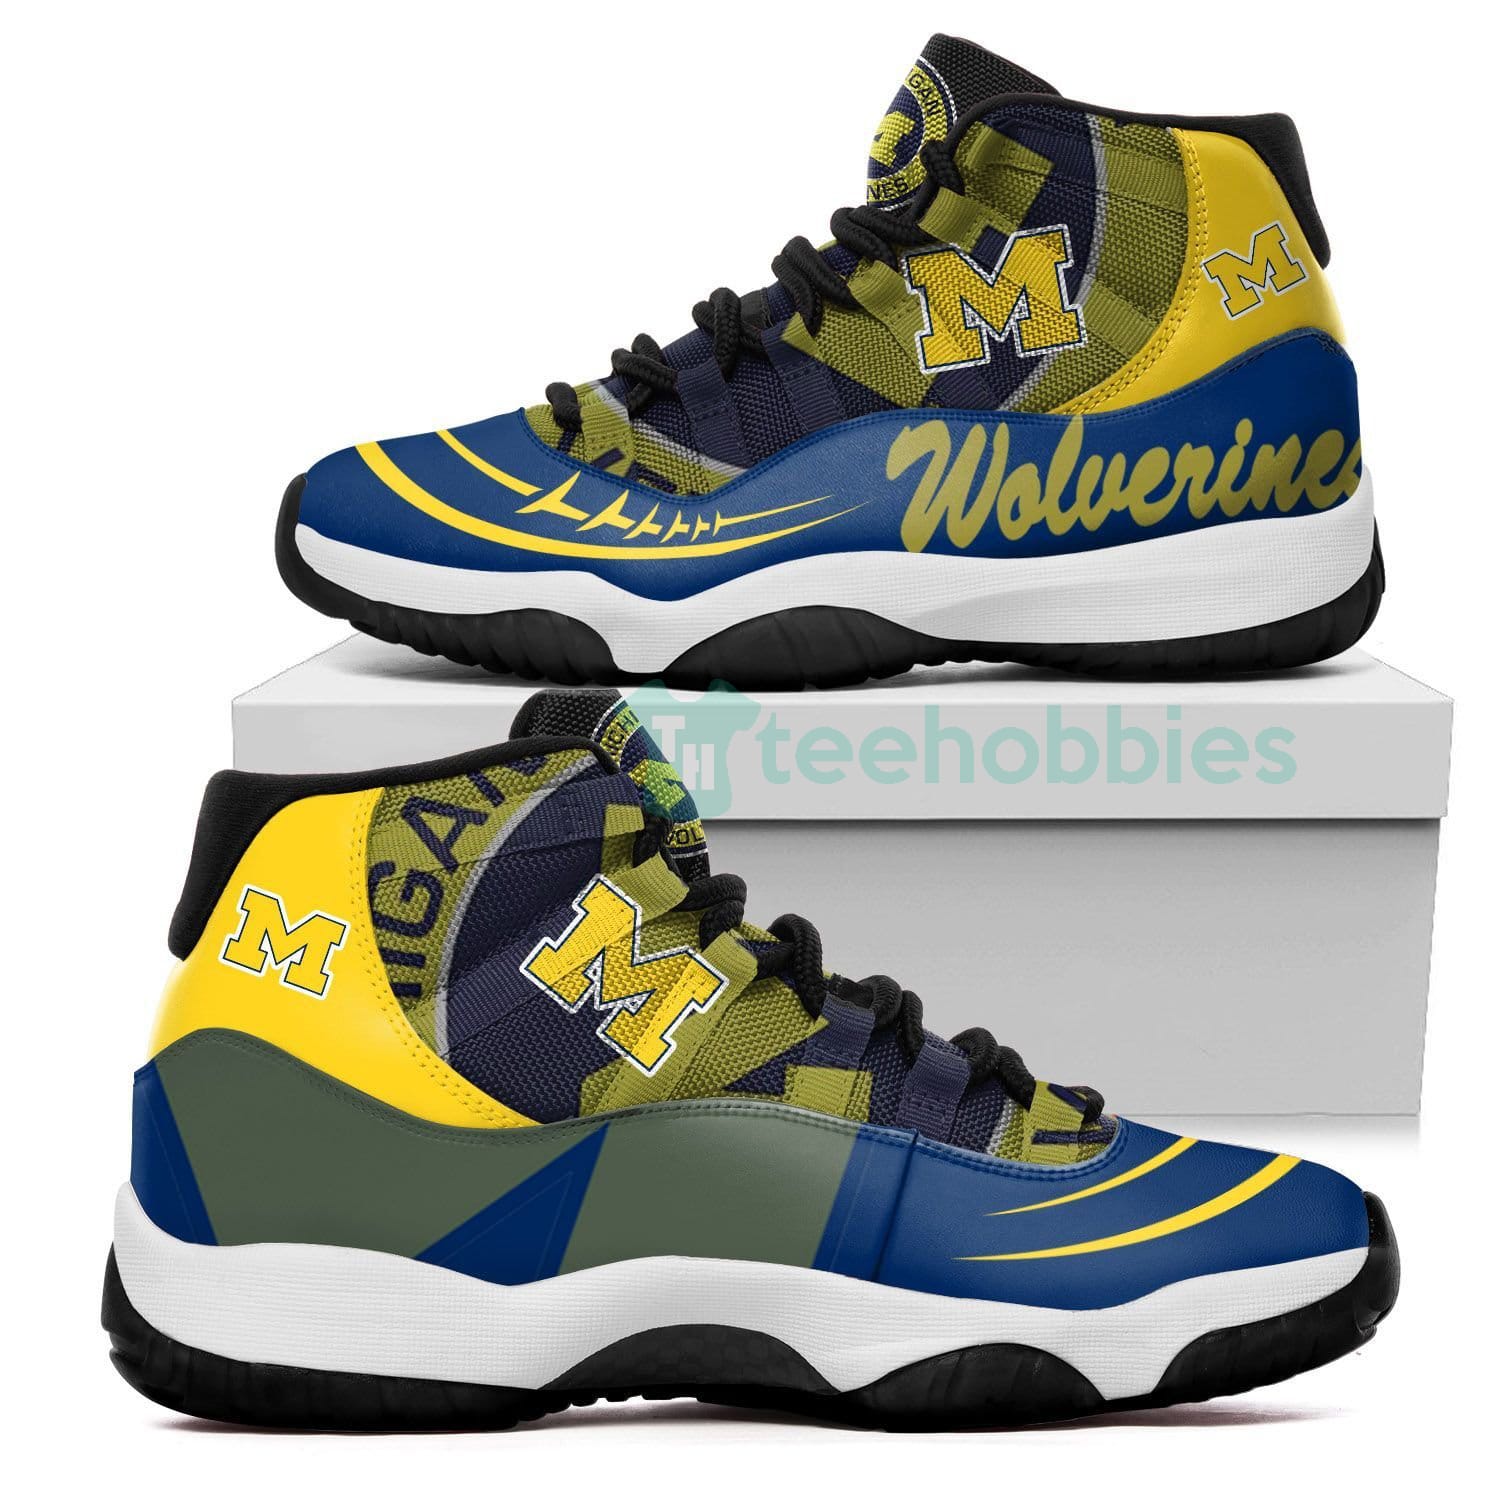 Michigan Wolverines New Air Jordan 11 Shoes Fans Product photo 1